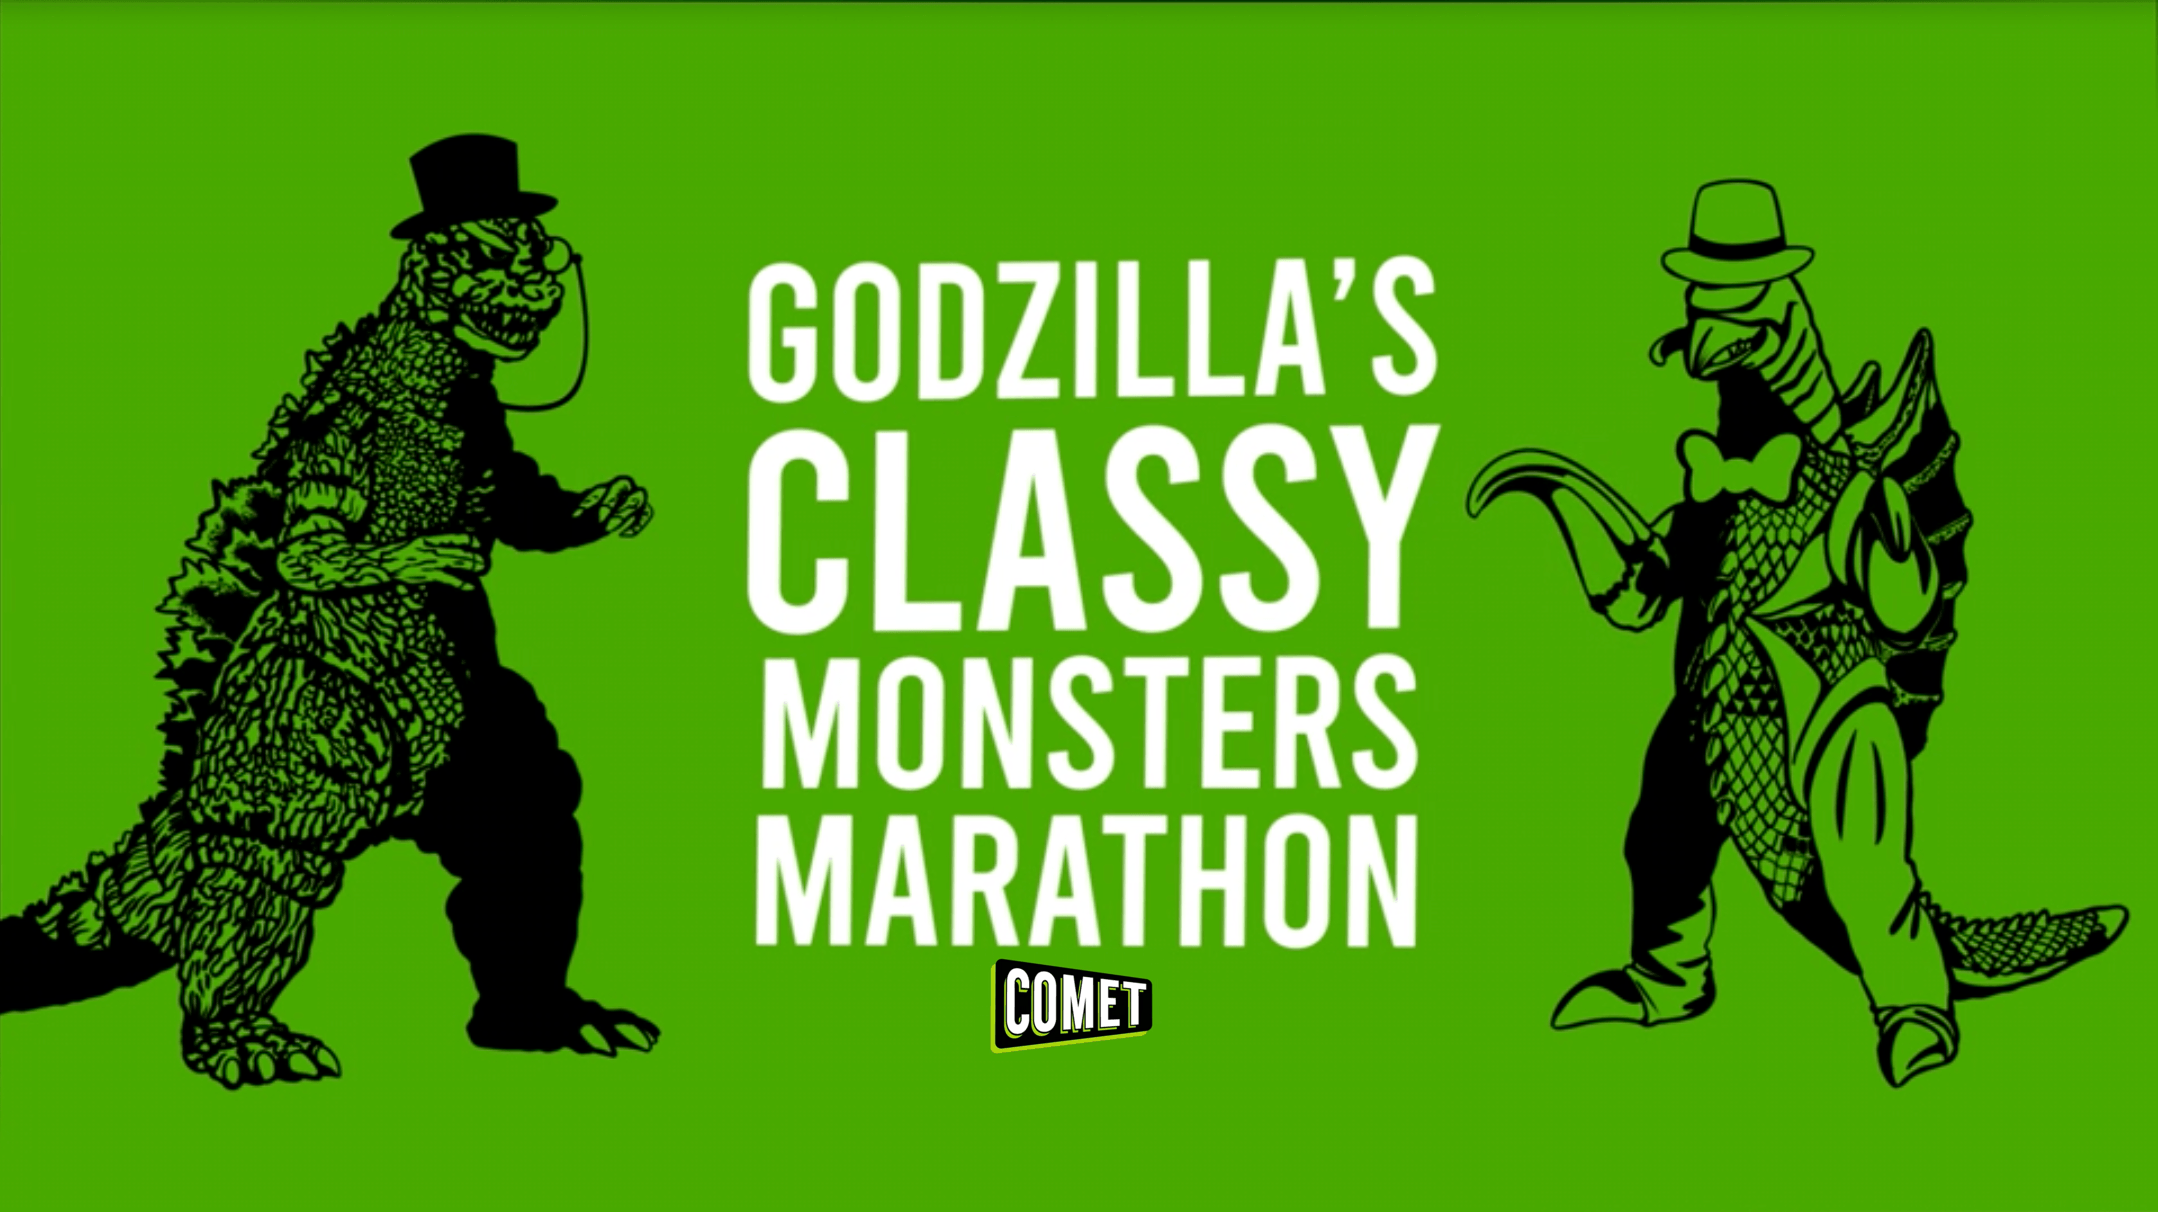 Comet is Keeping it Classy with the Godzilla Classy Monster Marathon This Saturday